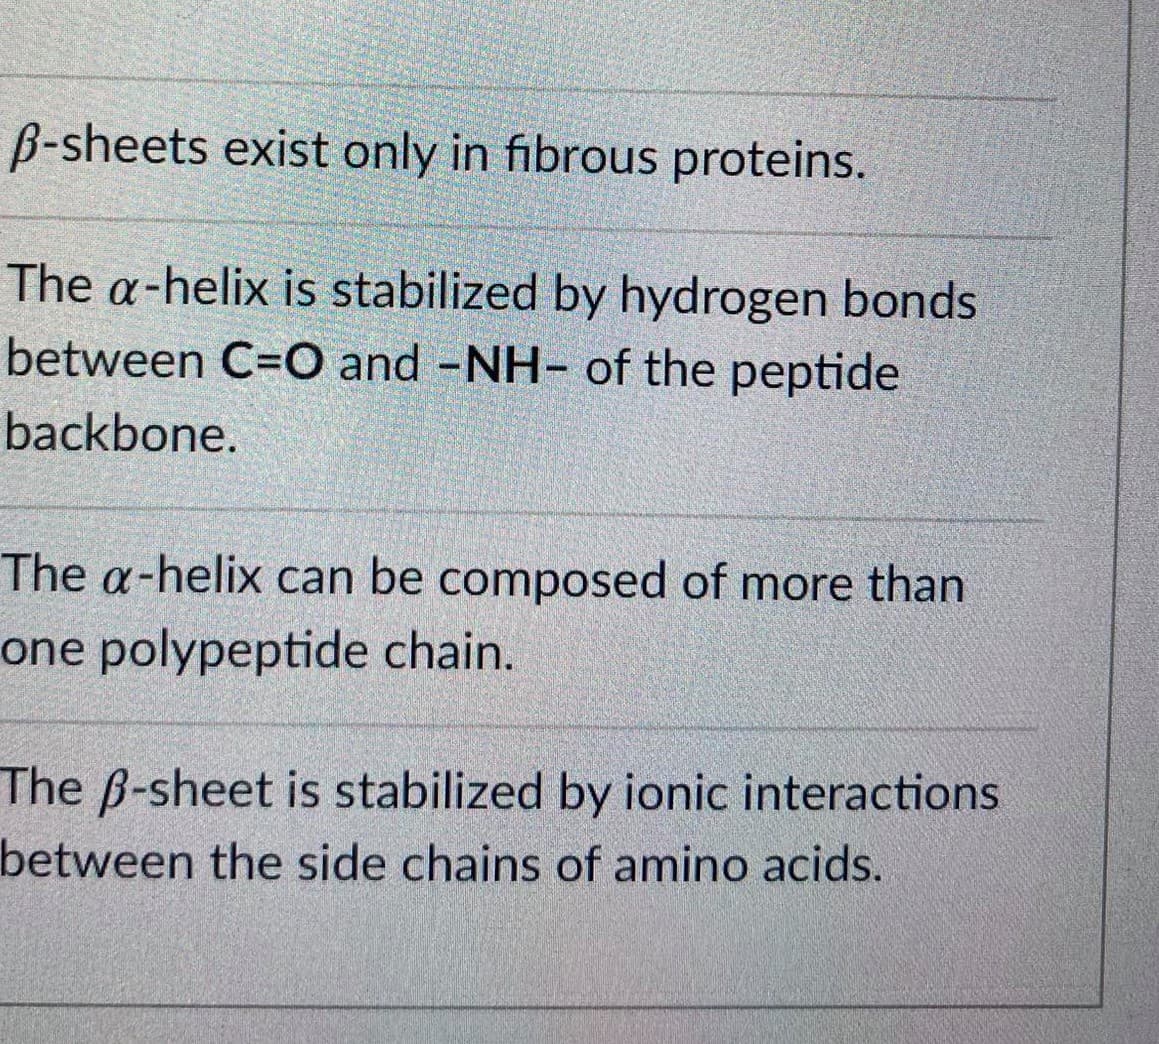 B-sheets exist only in fibrous proteins.
The a-helix is stabilized by hydrogen bonds
between C=O and -NH- of the peptide
backbone.
The a-helix can be composed of more than
one polypeptide chain.
The B-sheet is stabilized by ionic interactions
between the side chains of amino acids.
